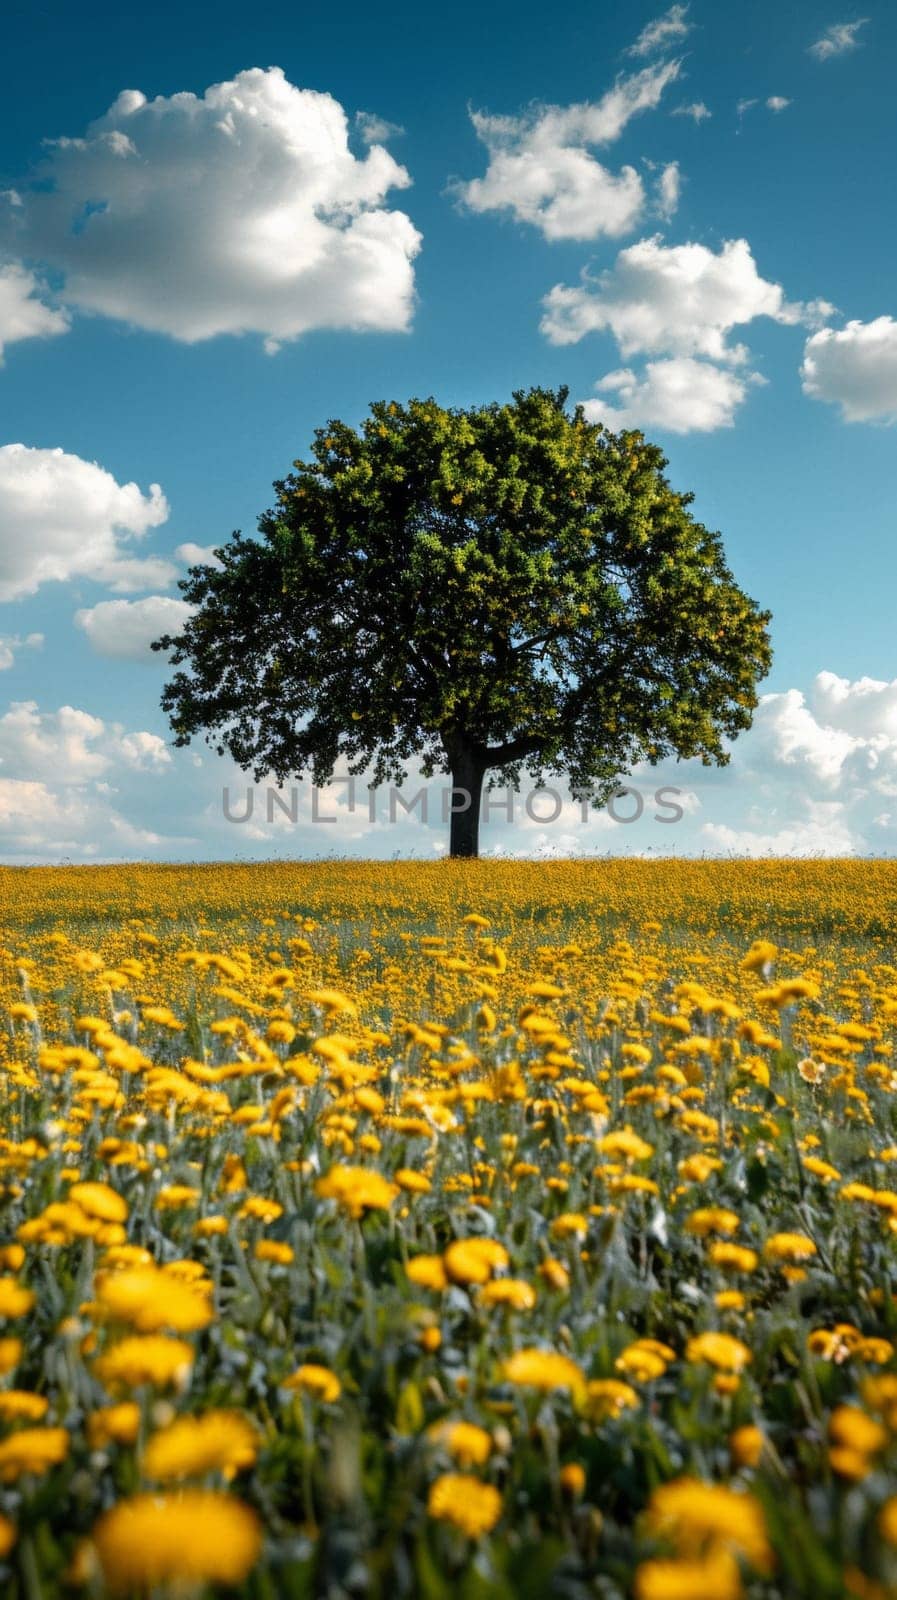 A lone tree in a field of yellow flowers with blue sky, AI by starush